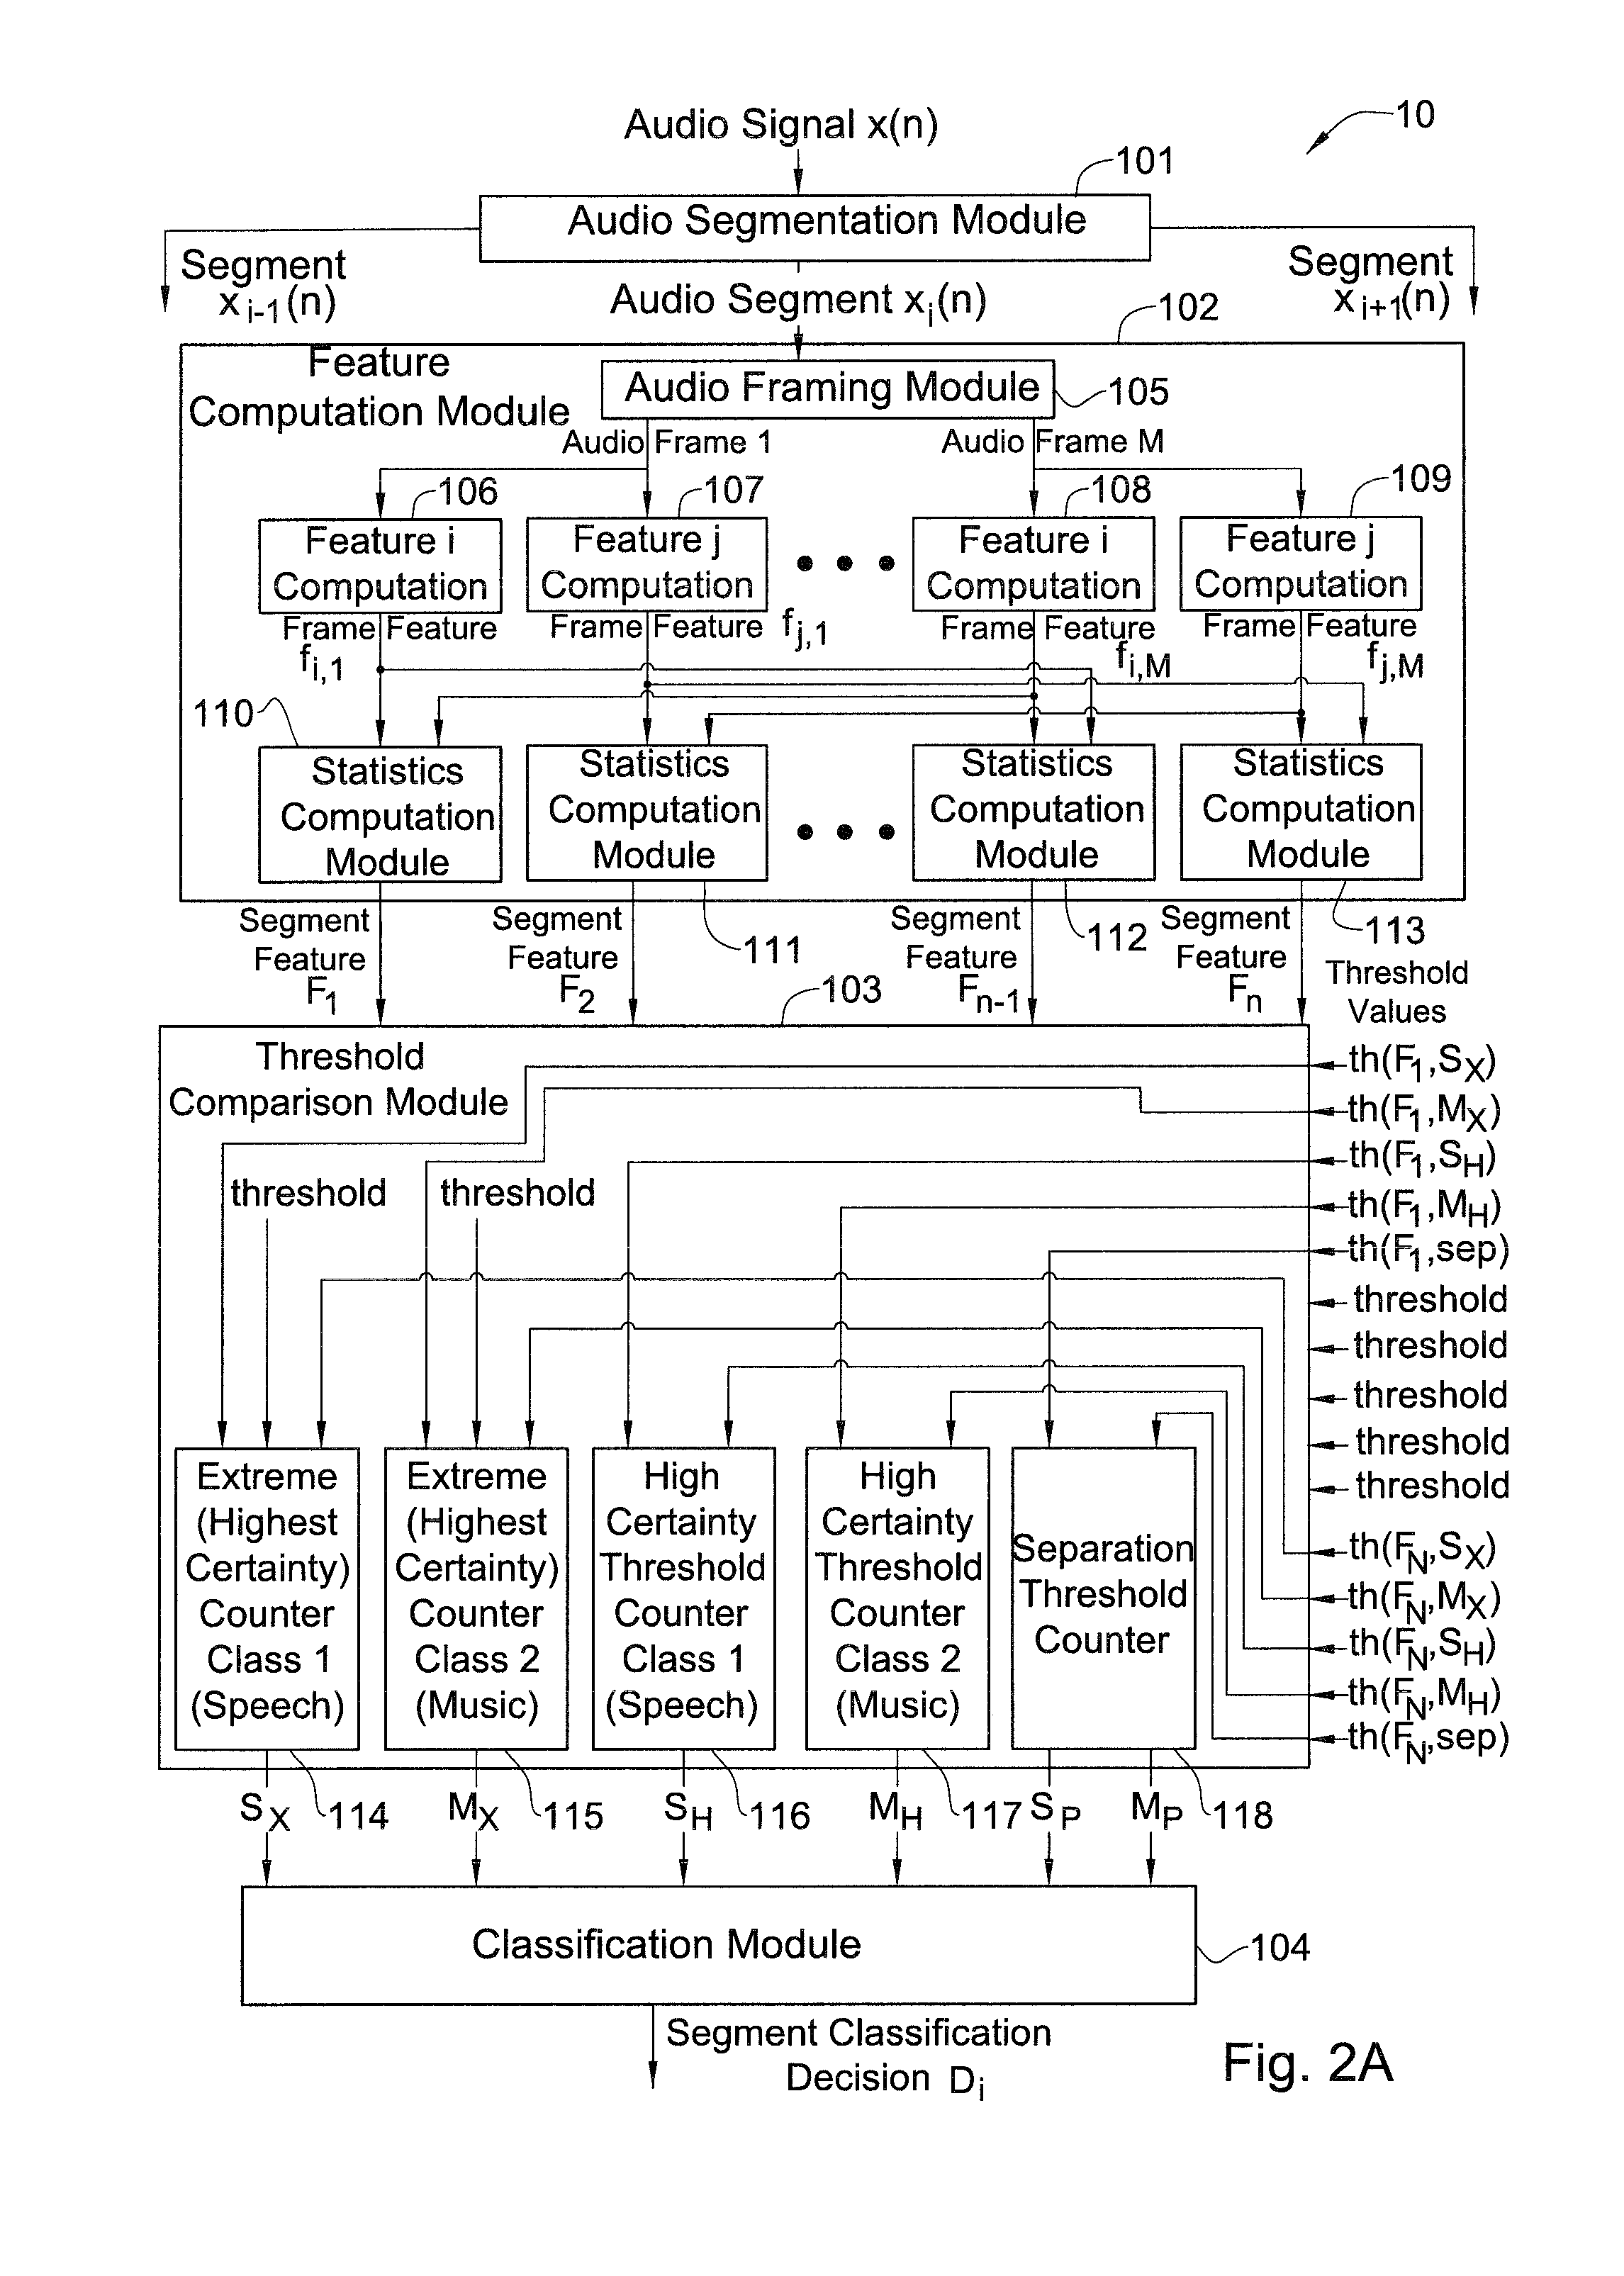 Apparatus and method for classification and segmentation of audio content, based on the audio signal